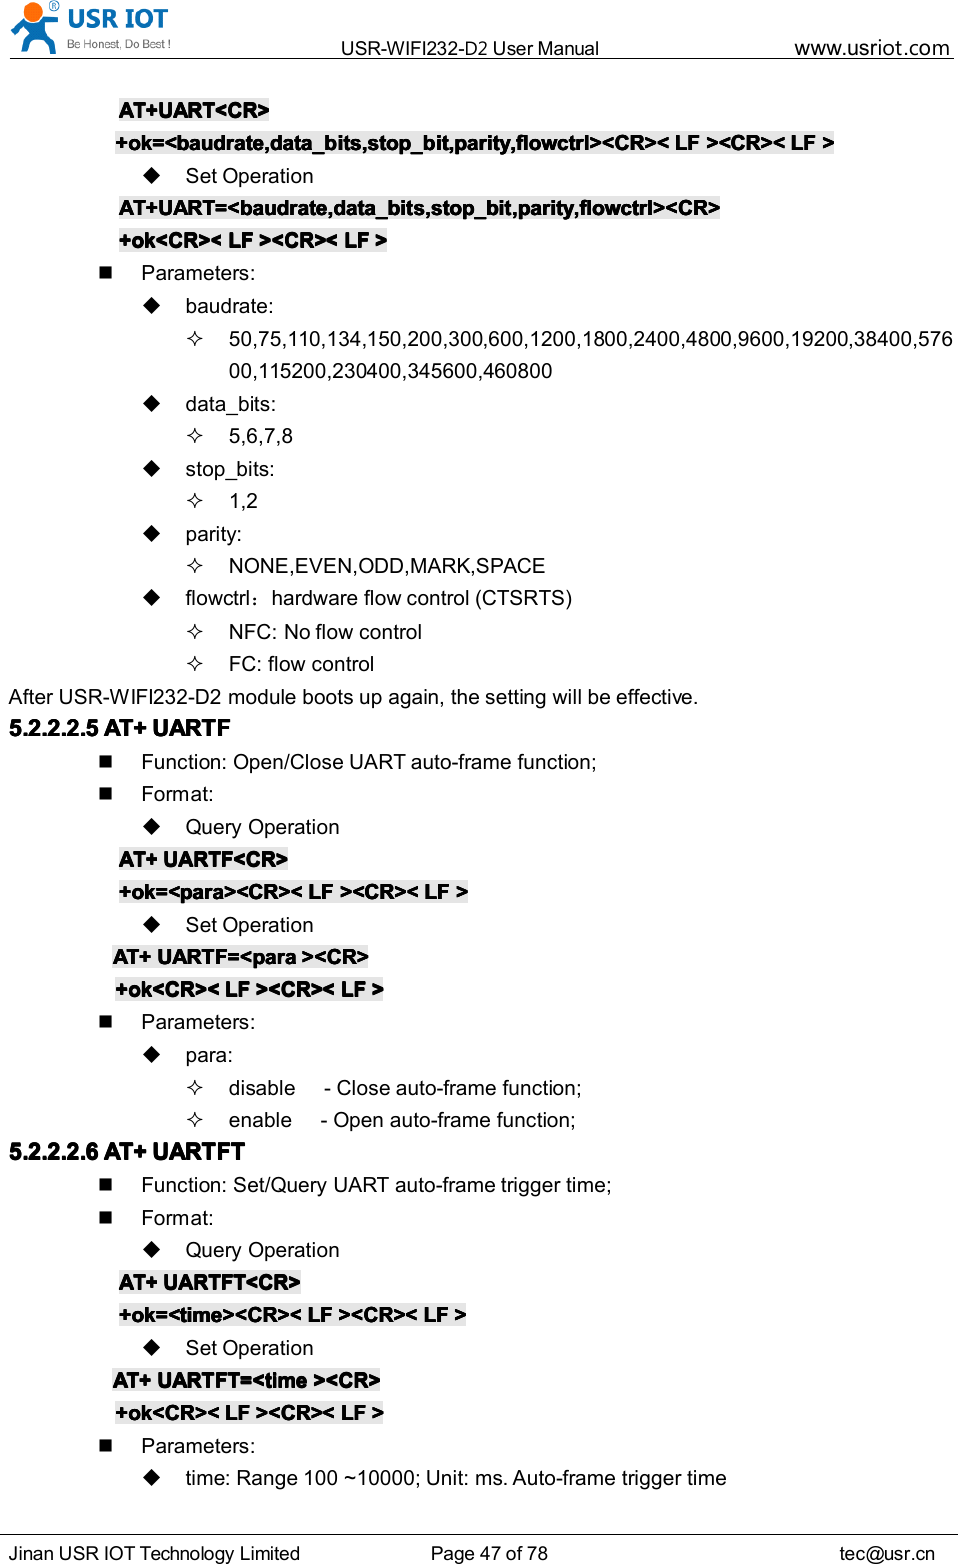 USR-WIFI232- D2 User Manual www.usr iot .comJinan USR IOT Technology Limited Page 47 of 78 tec@usr.cnAT+UART&lt;CR&gt;AT+UART&lt;CR&gt;AT+UART&lt;CR&gt;AT+UART&lt;CR&gt;+ok=&lt;baudrate,data_bits,stop_bit,parity,flowctrl&gt;&lt;CR&gt;&lt;+ok=&lt;baudrate,data_bits,stop_bit,parity,flowctrl&gt;&lt;CR&gt;&lt;+ok=&lt;baudrate,data_bits,stop_bit,parity,flowctrl&gt;&lt;CR&gt;&lt;+ok=&lt;baudrate,data_bits,stop_bit,parity,flowctrl&gt;&lt;CR&gt;&lt; LFLFLFLF &gt;&lt;CR&gt;&lt;&gt;&lt;CR&gt;&lt;&gt;&lt;CR&gt;&lt;&gt;&lt;CR&gt;&lt; LFLFLFLF &gt;&gt;&gt;&gt;Set OperationAT+UART=&lt;baudrate,data_bits,stop_bit,parity,flowctrl&gt;&lt;CR&gt;AT+UART=&lt;baudrate,data_bits,stop_bit,parity,flowctrl&gt;&lt;CR&gt;AT+UART=&lt;baudrate,data_bits,stop_bit,parity,flowctrl&gt;&lt;CR&gt;AT+UART=&lt;baudrate,data_bits,stop_bit,parity,flowctrl&gt;&lt;CR&gt;+ok&lt;CR&gt;&lt;+ok&lt;CR&gt;&lt;+ok&lt;CR&gt;&lt;+ok&lt;CR&gt;&lt; LFLFLFLF &gt;&lt;CR&gt;&lt;&gt;&lt;CR&gt;&lt;&gt;&lt;CR&gt;&lt;&gt;&lt;CR&gt;&lt; LFLFLFLF &gt;&gt;&gt;&gt;Parameters:baudrate:50,75,110,134,150,200,300,600,1200,1800,2400,4800,9600,19200,38400,57600,115200,230400,345600,460800data_bits:5,6,7,8stop_bits:1,2parity:NONE,EVEN,ODD,MARK,SPACEflowctrl ：hardware flow control (CTSRTS)NFC: No flow controlFC: flow controlAfter USR-WIFI232-D2 module boots up again , the setting will be effective.5.2.2.2.55.2.2.2.55.2.2.2.55.2.2.2.5 AT+AT+AT+AT+ UARTFUARTFUARTFUARTFFunction: Open/Close UART auto-frame function;Format:Query OperationAT+AT+AT+AT+ UARTF&lt;CR&gt;UARTF&lt;CR&gt;UARTF&lt;CR&gt;UARTF&lt;CR&gt;+ok=&lt;para&gt;&lt;CR&gt;&lt;+ok=&lt;para&gt;&lt;CR&gt;&lt;+ok=&lt;para&gt;&lt;CR&gt;&lt;+ok=&lt;para&gt;&lt;CR&gt;&lt; LFLFLFLF &gt;&lt;CR&gt;&lt;&gt;&lt;CR&gt;&lt;&gt;&lt;CR&gt;&lt;&gt;&lt;CR&gt;&lt; LFLFLFLF &gt;&gt;&gt;&gt;Set OperationAT+AT+AT+AT+ UARTF=&lt;paraUARTF=&lt;paraUARTF=&lt;paraUARTF=&lt;para &gt;&lt;CR&gt;&gt;&lt;CR&gt;&gt;&lt;CR&gt;&gt;&lt;CR&gt;+ok&lt;CR&gt;&lt;+ok&lt;CR&gt;&lt;+ok&lt;CR&gt;&lt;+ok&lt;CR&gt;&lt; LFLFLFLF &gt;&lt;CR&gt;&lt;&gt;&lt;CR&gt;&lt;&gt;&lt;CR&gt;&lt;&gt;&lt;CR&gt;&lt; LFLFLFLF &gt;&gt;&gt;&gt;Parameters:para:disable - Close auto-frame function;enable - Open auto-frame function;5.2.2.2.65.2.2.2.65.2.2.2.65.2.2.2.6 AT+AT+AT+AT+ UARTFTUARTFTUARTFTUARTFTFunction: Set/Query UART auto-frame trigger time;Format:Query OperationAT+AT+AT+AT+ UARTFT&lt;CR&gt;UARTFT&lt;CR&gt;UARTFT&lt;CR&gt;UARTFT&lt;CR&gt;+ok=&lt;time&gt;&lt;CR&gt;&lt;+ok=&lt;time&gt;&lt;CR&gt;&lt;+ok=&lt;time&gt;&lt;CR&gt;&lt;+ok=&lt;time&gt;&lt;CR&gt;&lt; LFLFLFLF &gt;&lt;CR&gt;&lt;&gt;&lt;CR&gt;&lt;&gt;&lt;CR&gt;&lt;&gt;&lt;CR&gt;&lt; LFLFLFLF &gt;&gt;&gt;&gt;Set OperationAT+AT+AT+AT+ UARTFT=&lt;timeUARTFT=&lt;timeUARTFT=&lt;timeUARTFT=&lt;time &gt;&lt;CR&gt;&gt;&lt;CR&gt;&gt;&lt;CR&gt;&gt;&lt;CR&gt;+ok&lt;CR&gt;&lt;+ok&lt;CR&gt;&lt;+ok&lt;CR&gt;&lt;+ok&lt;CR&gt;&lt; LFLFLFLF &gt;&lt;CR&gt;&lt;&gt;&lt;CR&gt;&lt;&gt;&lt;CR&gt;&lt;&gt;&lt;CR&gt;&lt; LFLFLFLF &gt;&gt;&gt;&gt;Parameters:time: Range 100 ~10000; Unit: ms. Auto-frame trigger time